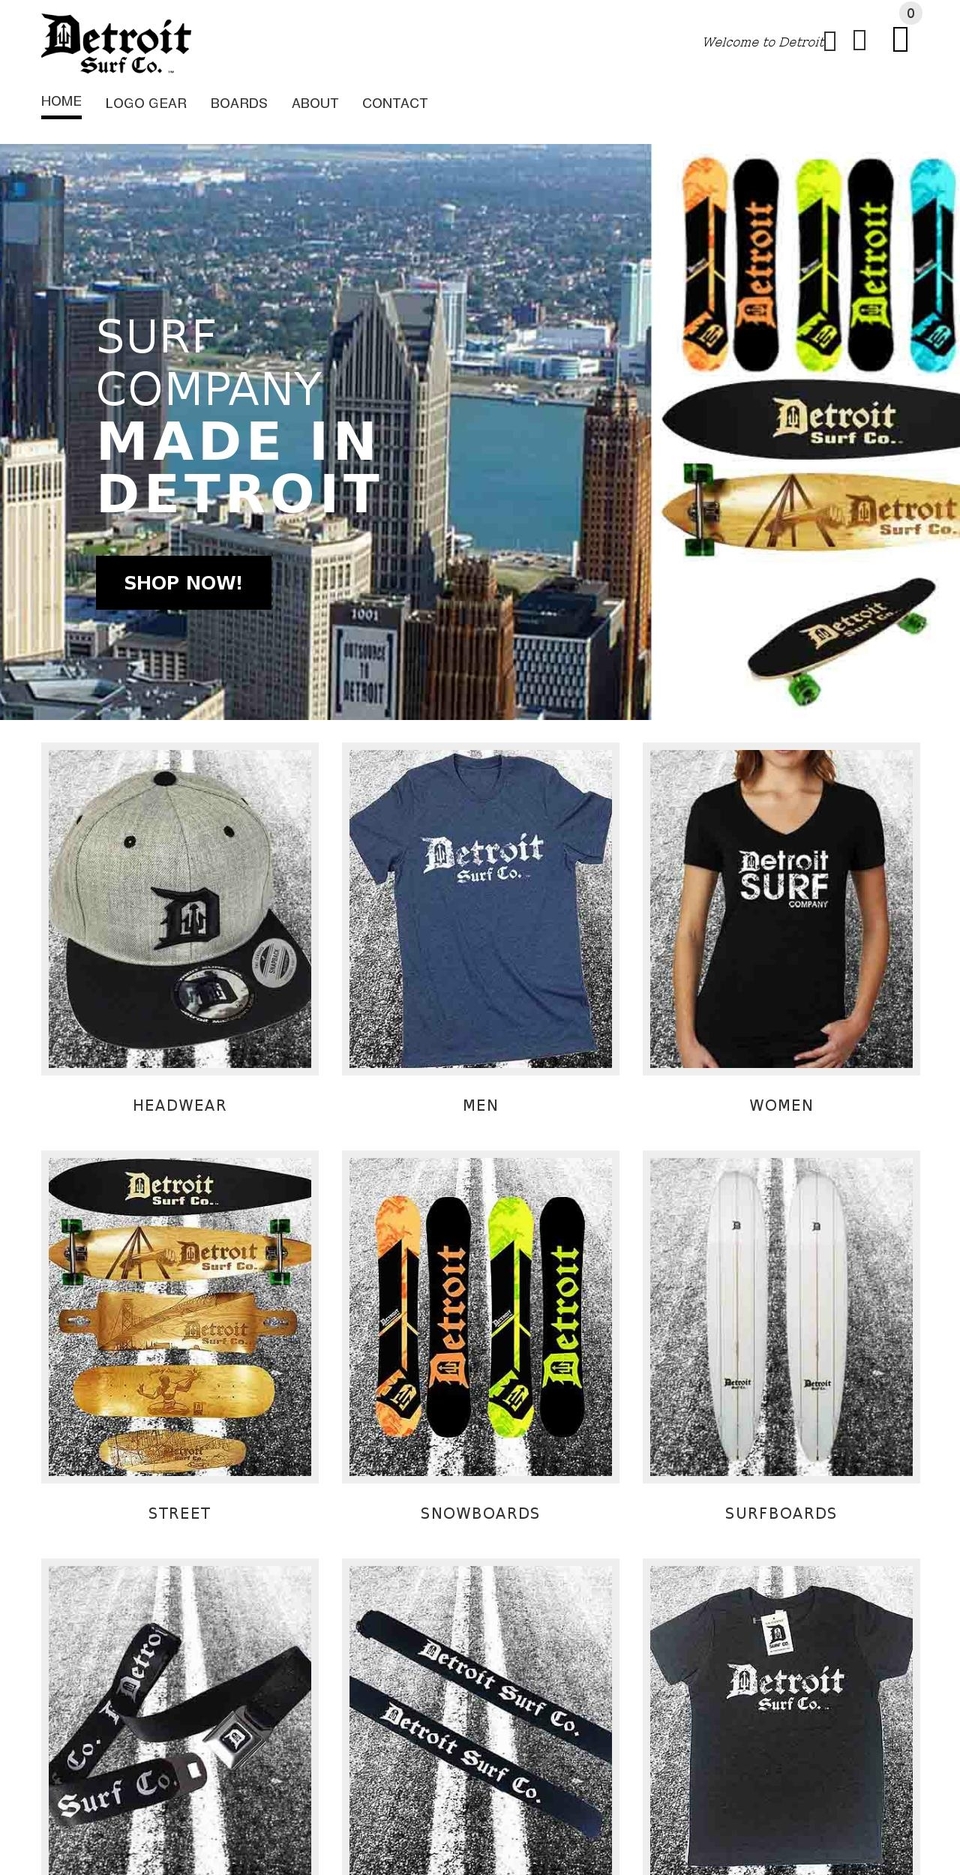 yourstore-v1-4-8 Shopify theme site example detroitsnowboards.com